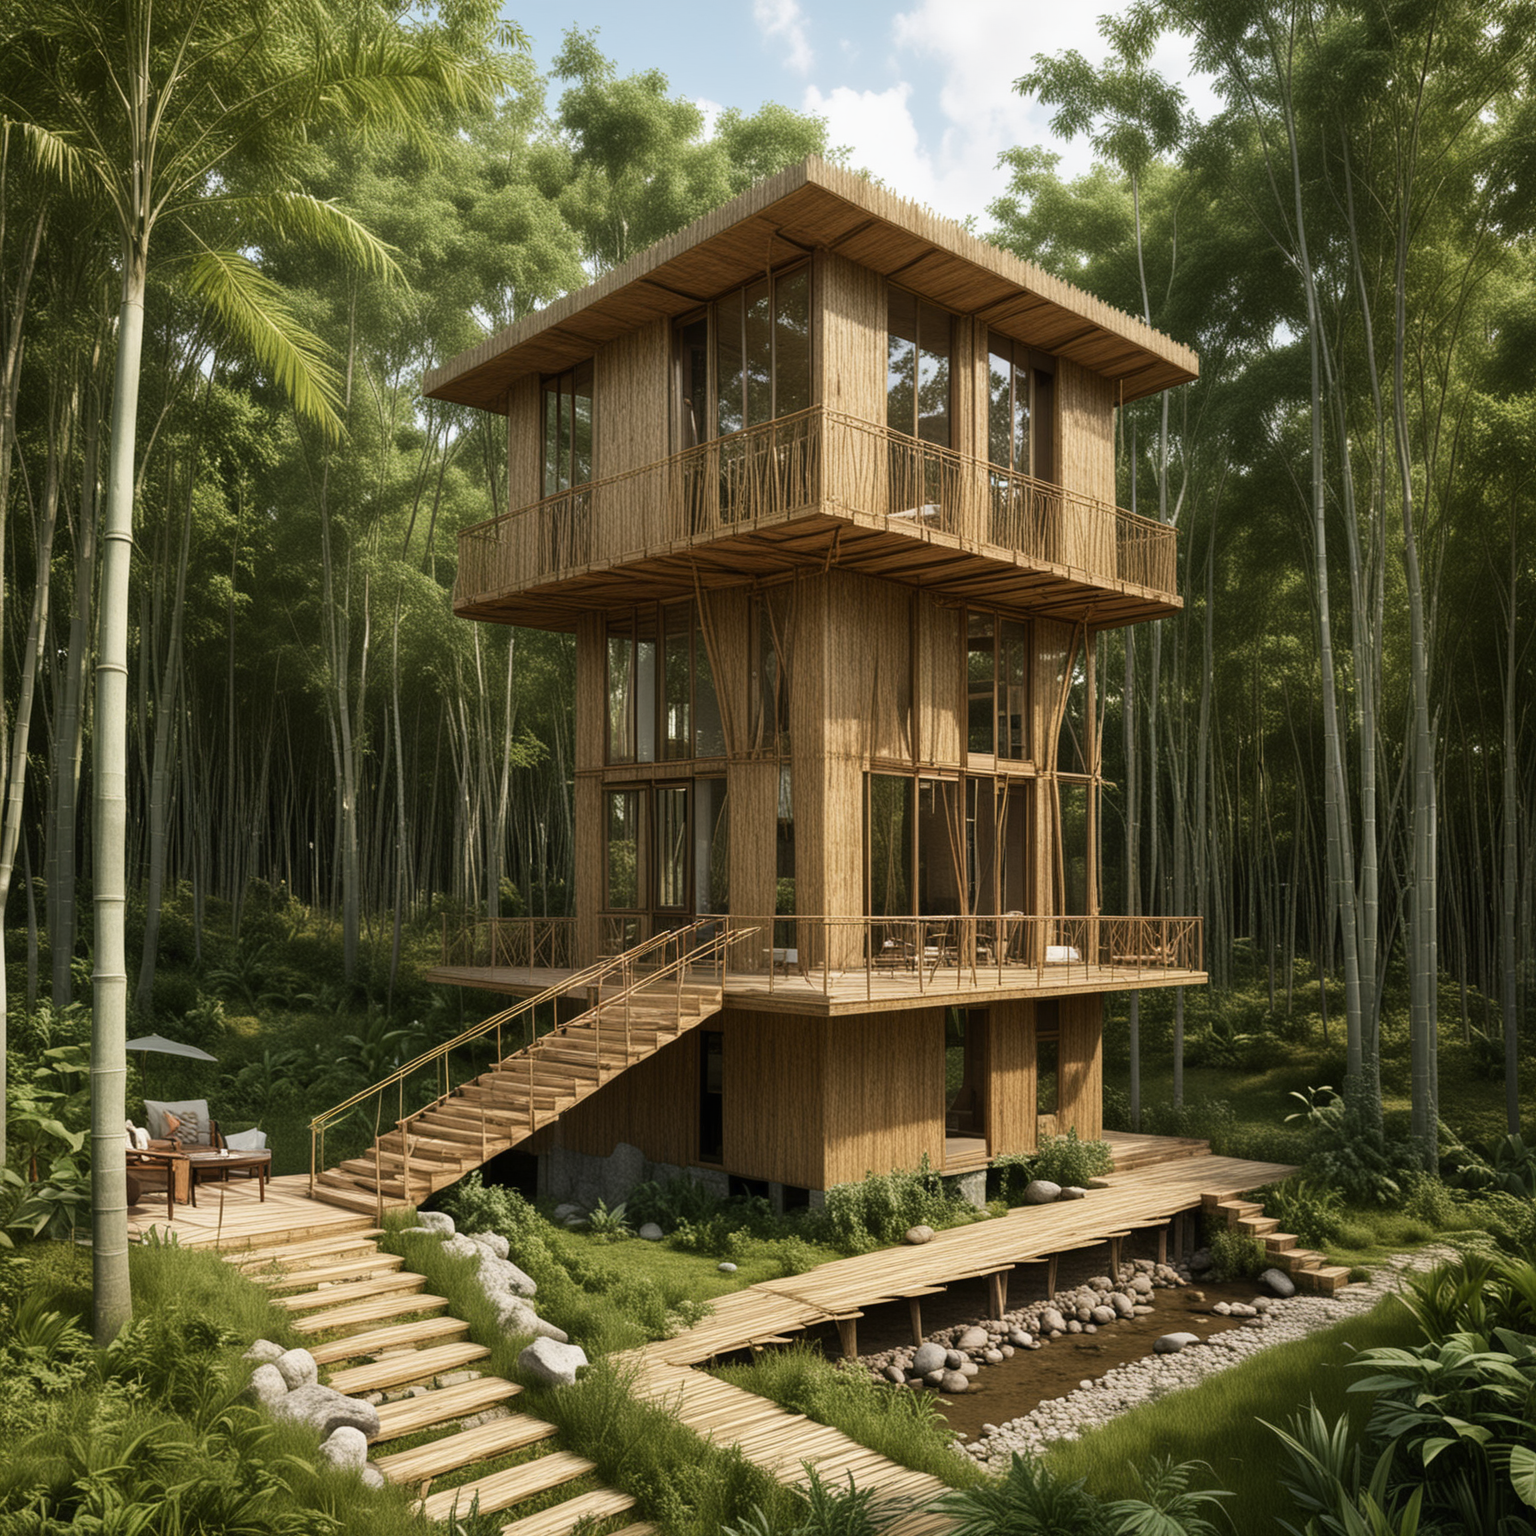 a small house made out of bamboo, The overall architecture of the house should be a futuristic modern design including the walls and roof of the structure. it will be elevated 25 feet high. It should have only three levels: the bottom level should be open without walls or windows, the second level will be open and should have a overhang platform with lounge area for people to sit and overlook a nearby river, the third and last level will have windows around for a panoramic view.  .The stairs leading up to the villa should be inside the hyperbolic tower